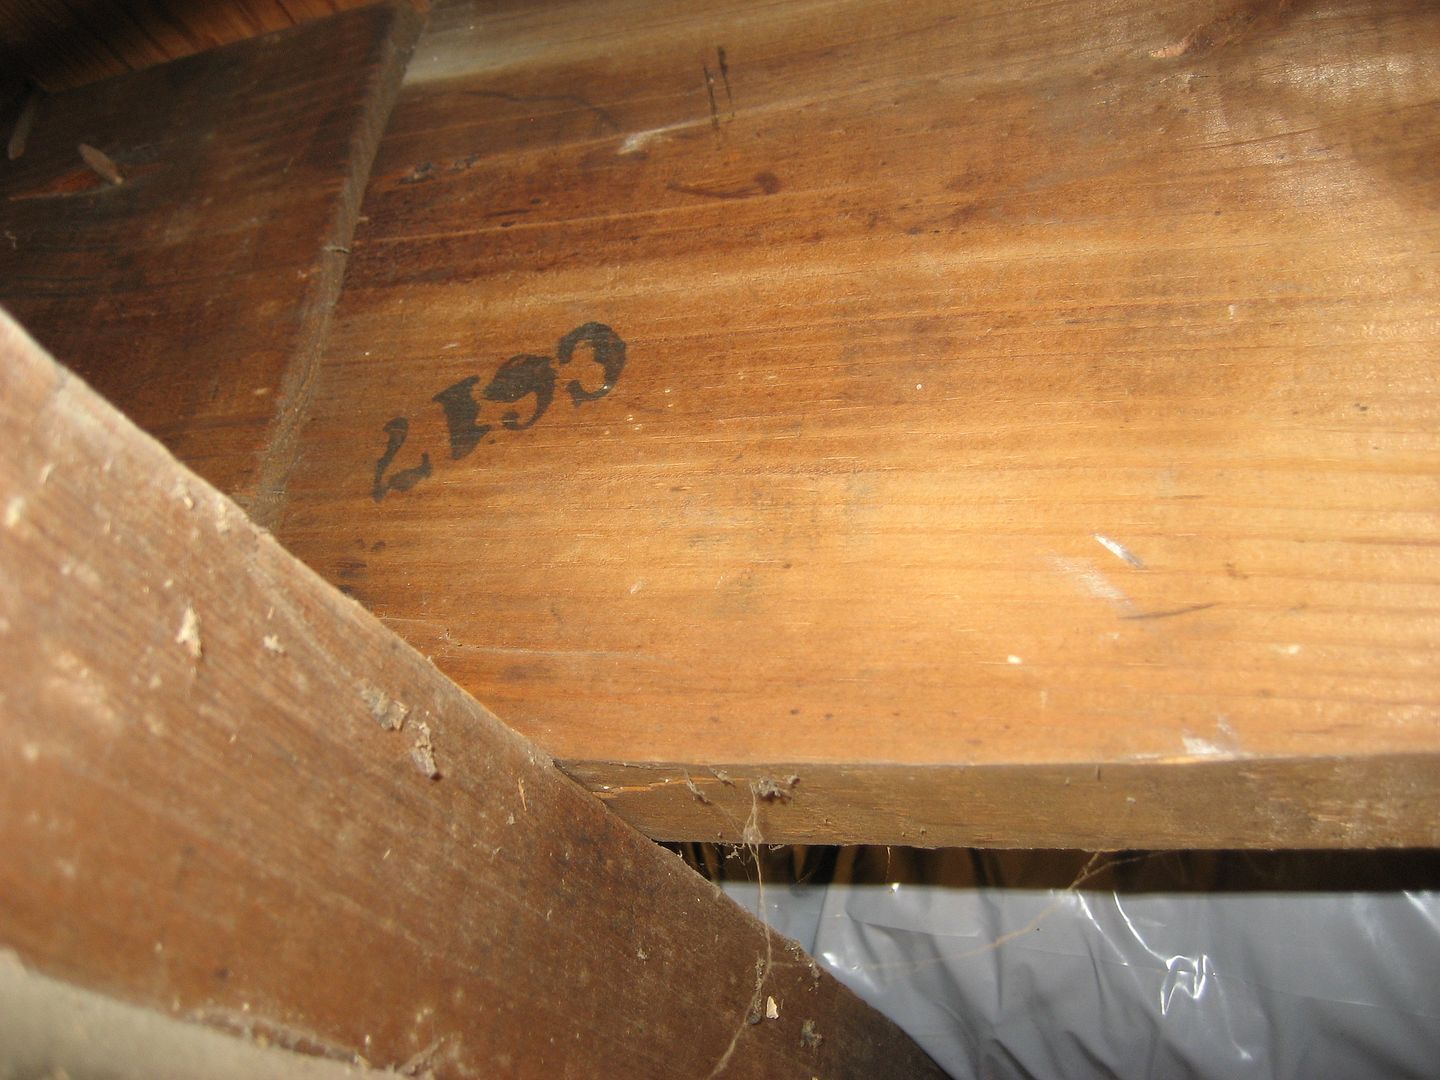 And we talk about how to identify marked lumber in kit homes.